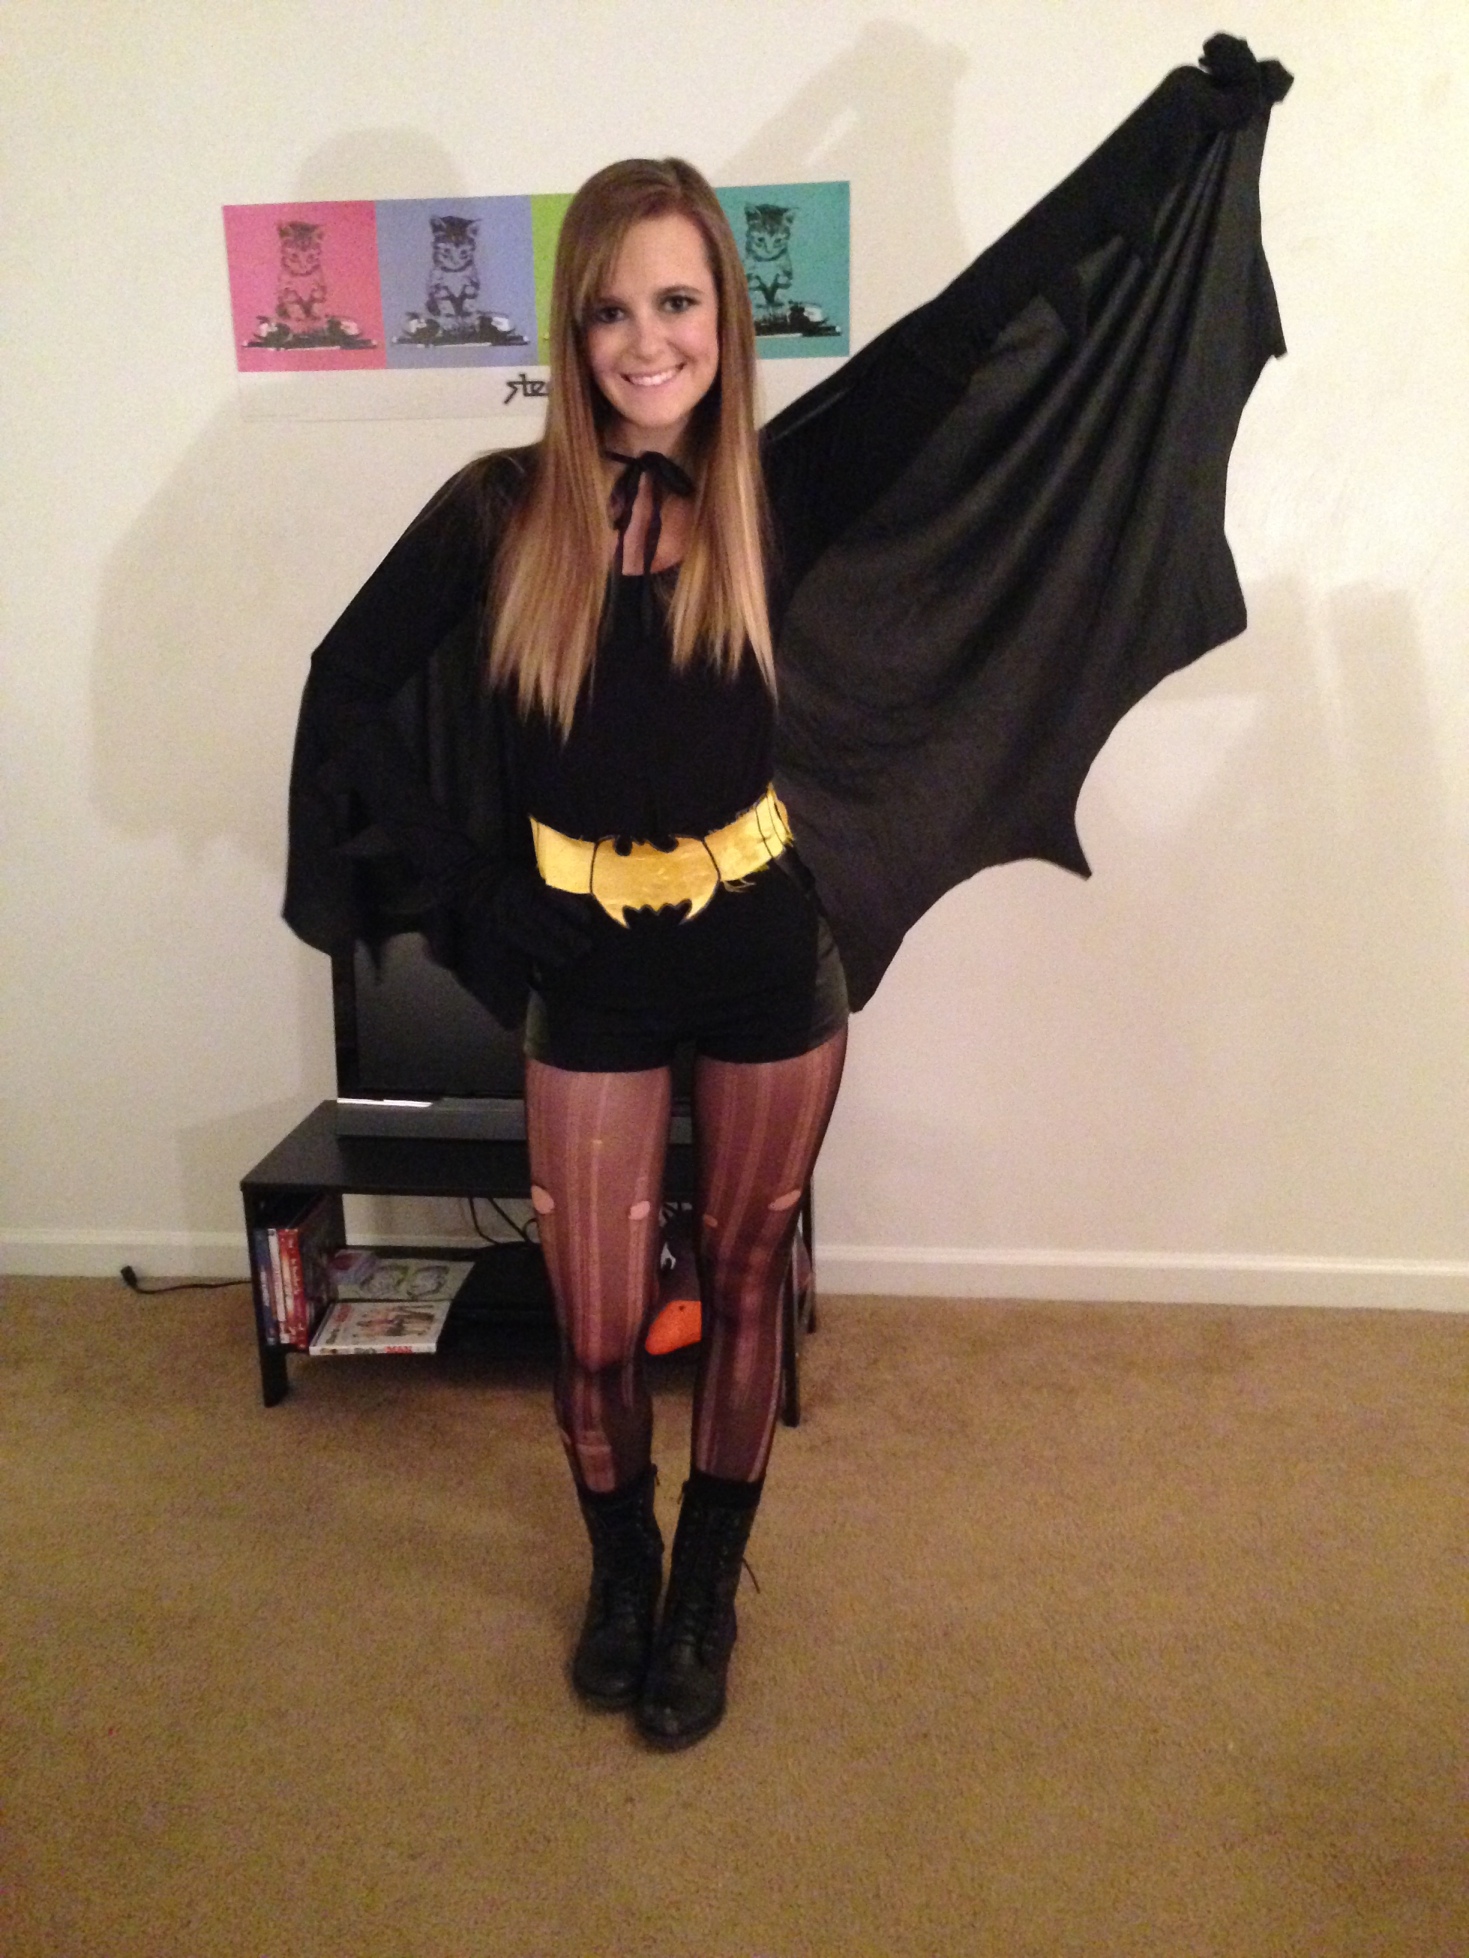 Batwoman to the rescue! 